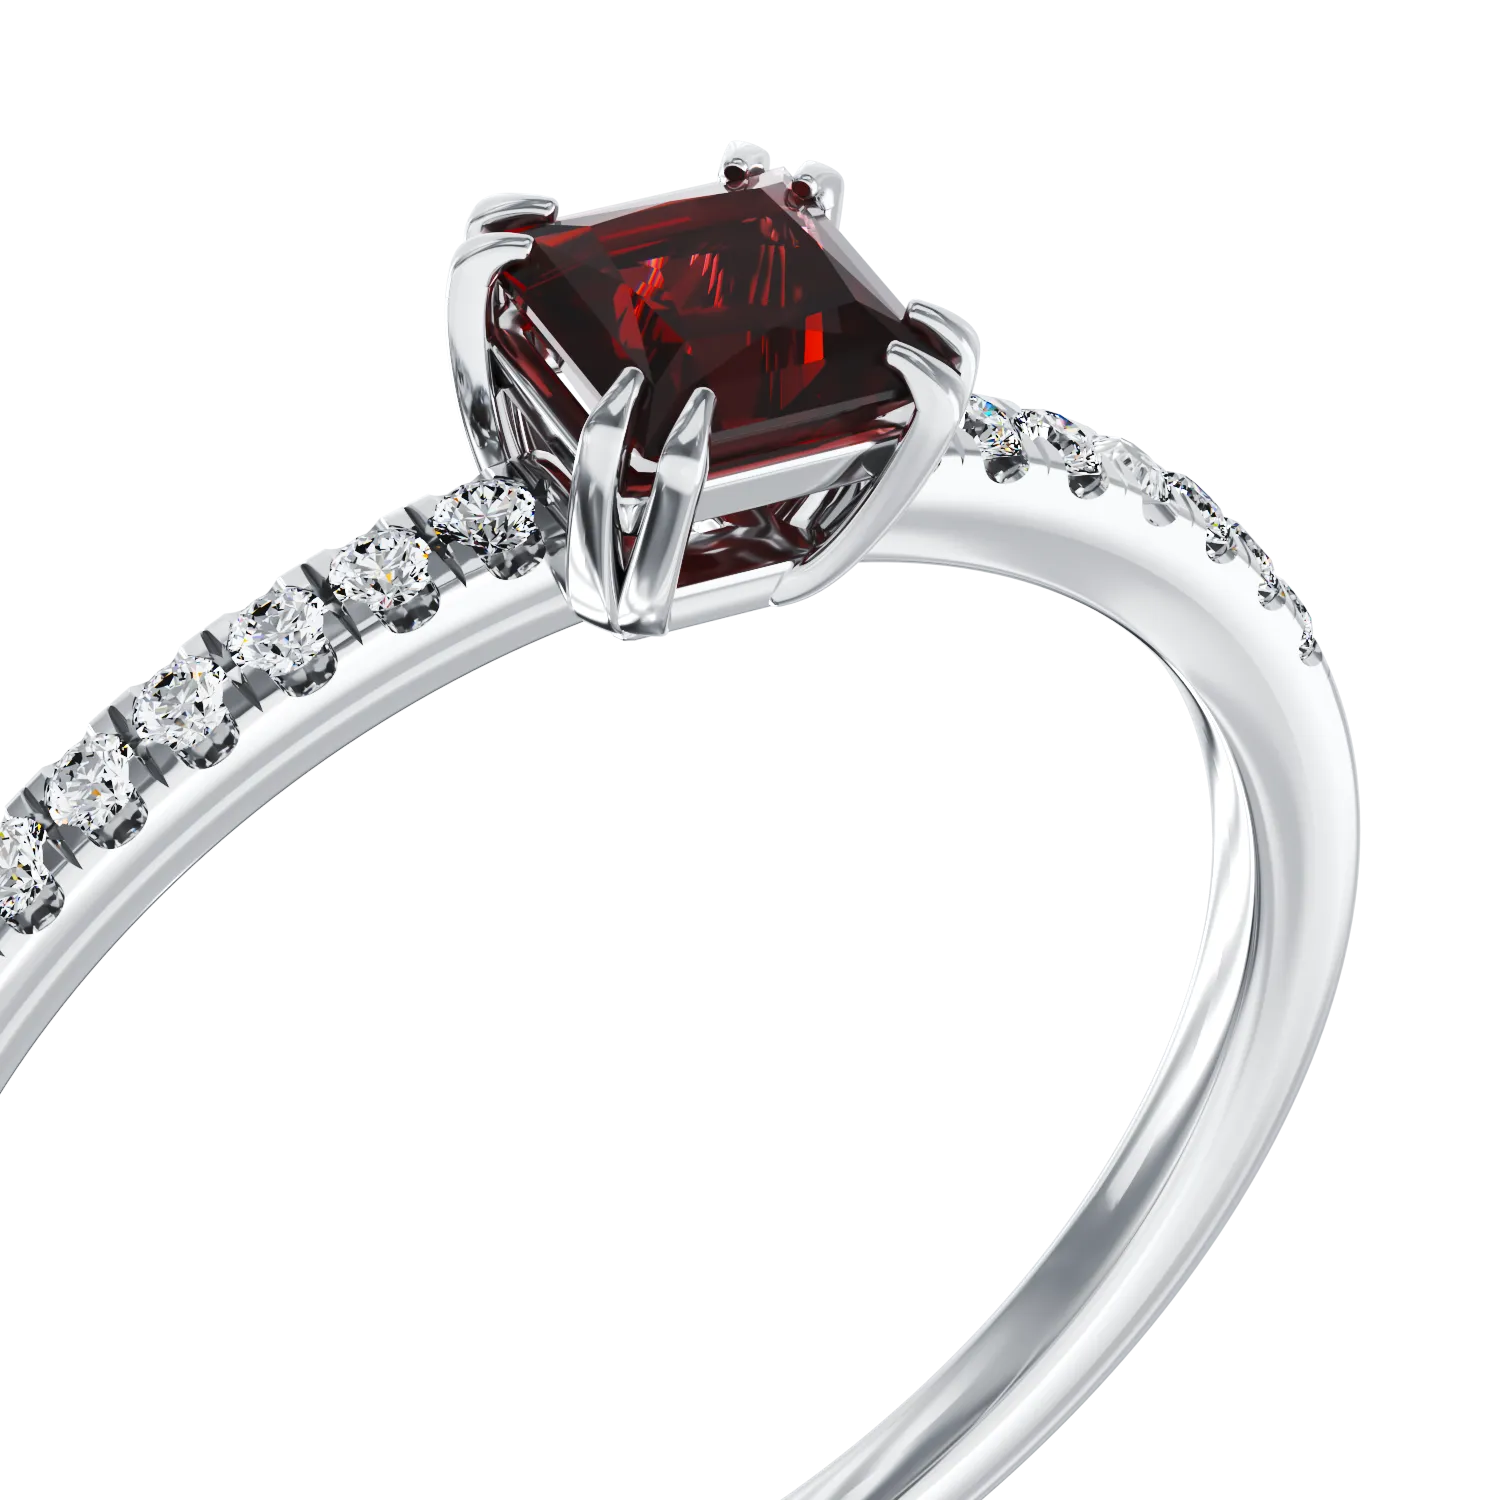 18K white gold engagement ring with 0.39ct multicolor tourmaline and 0.06ct diamonds